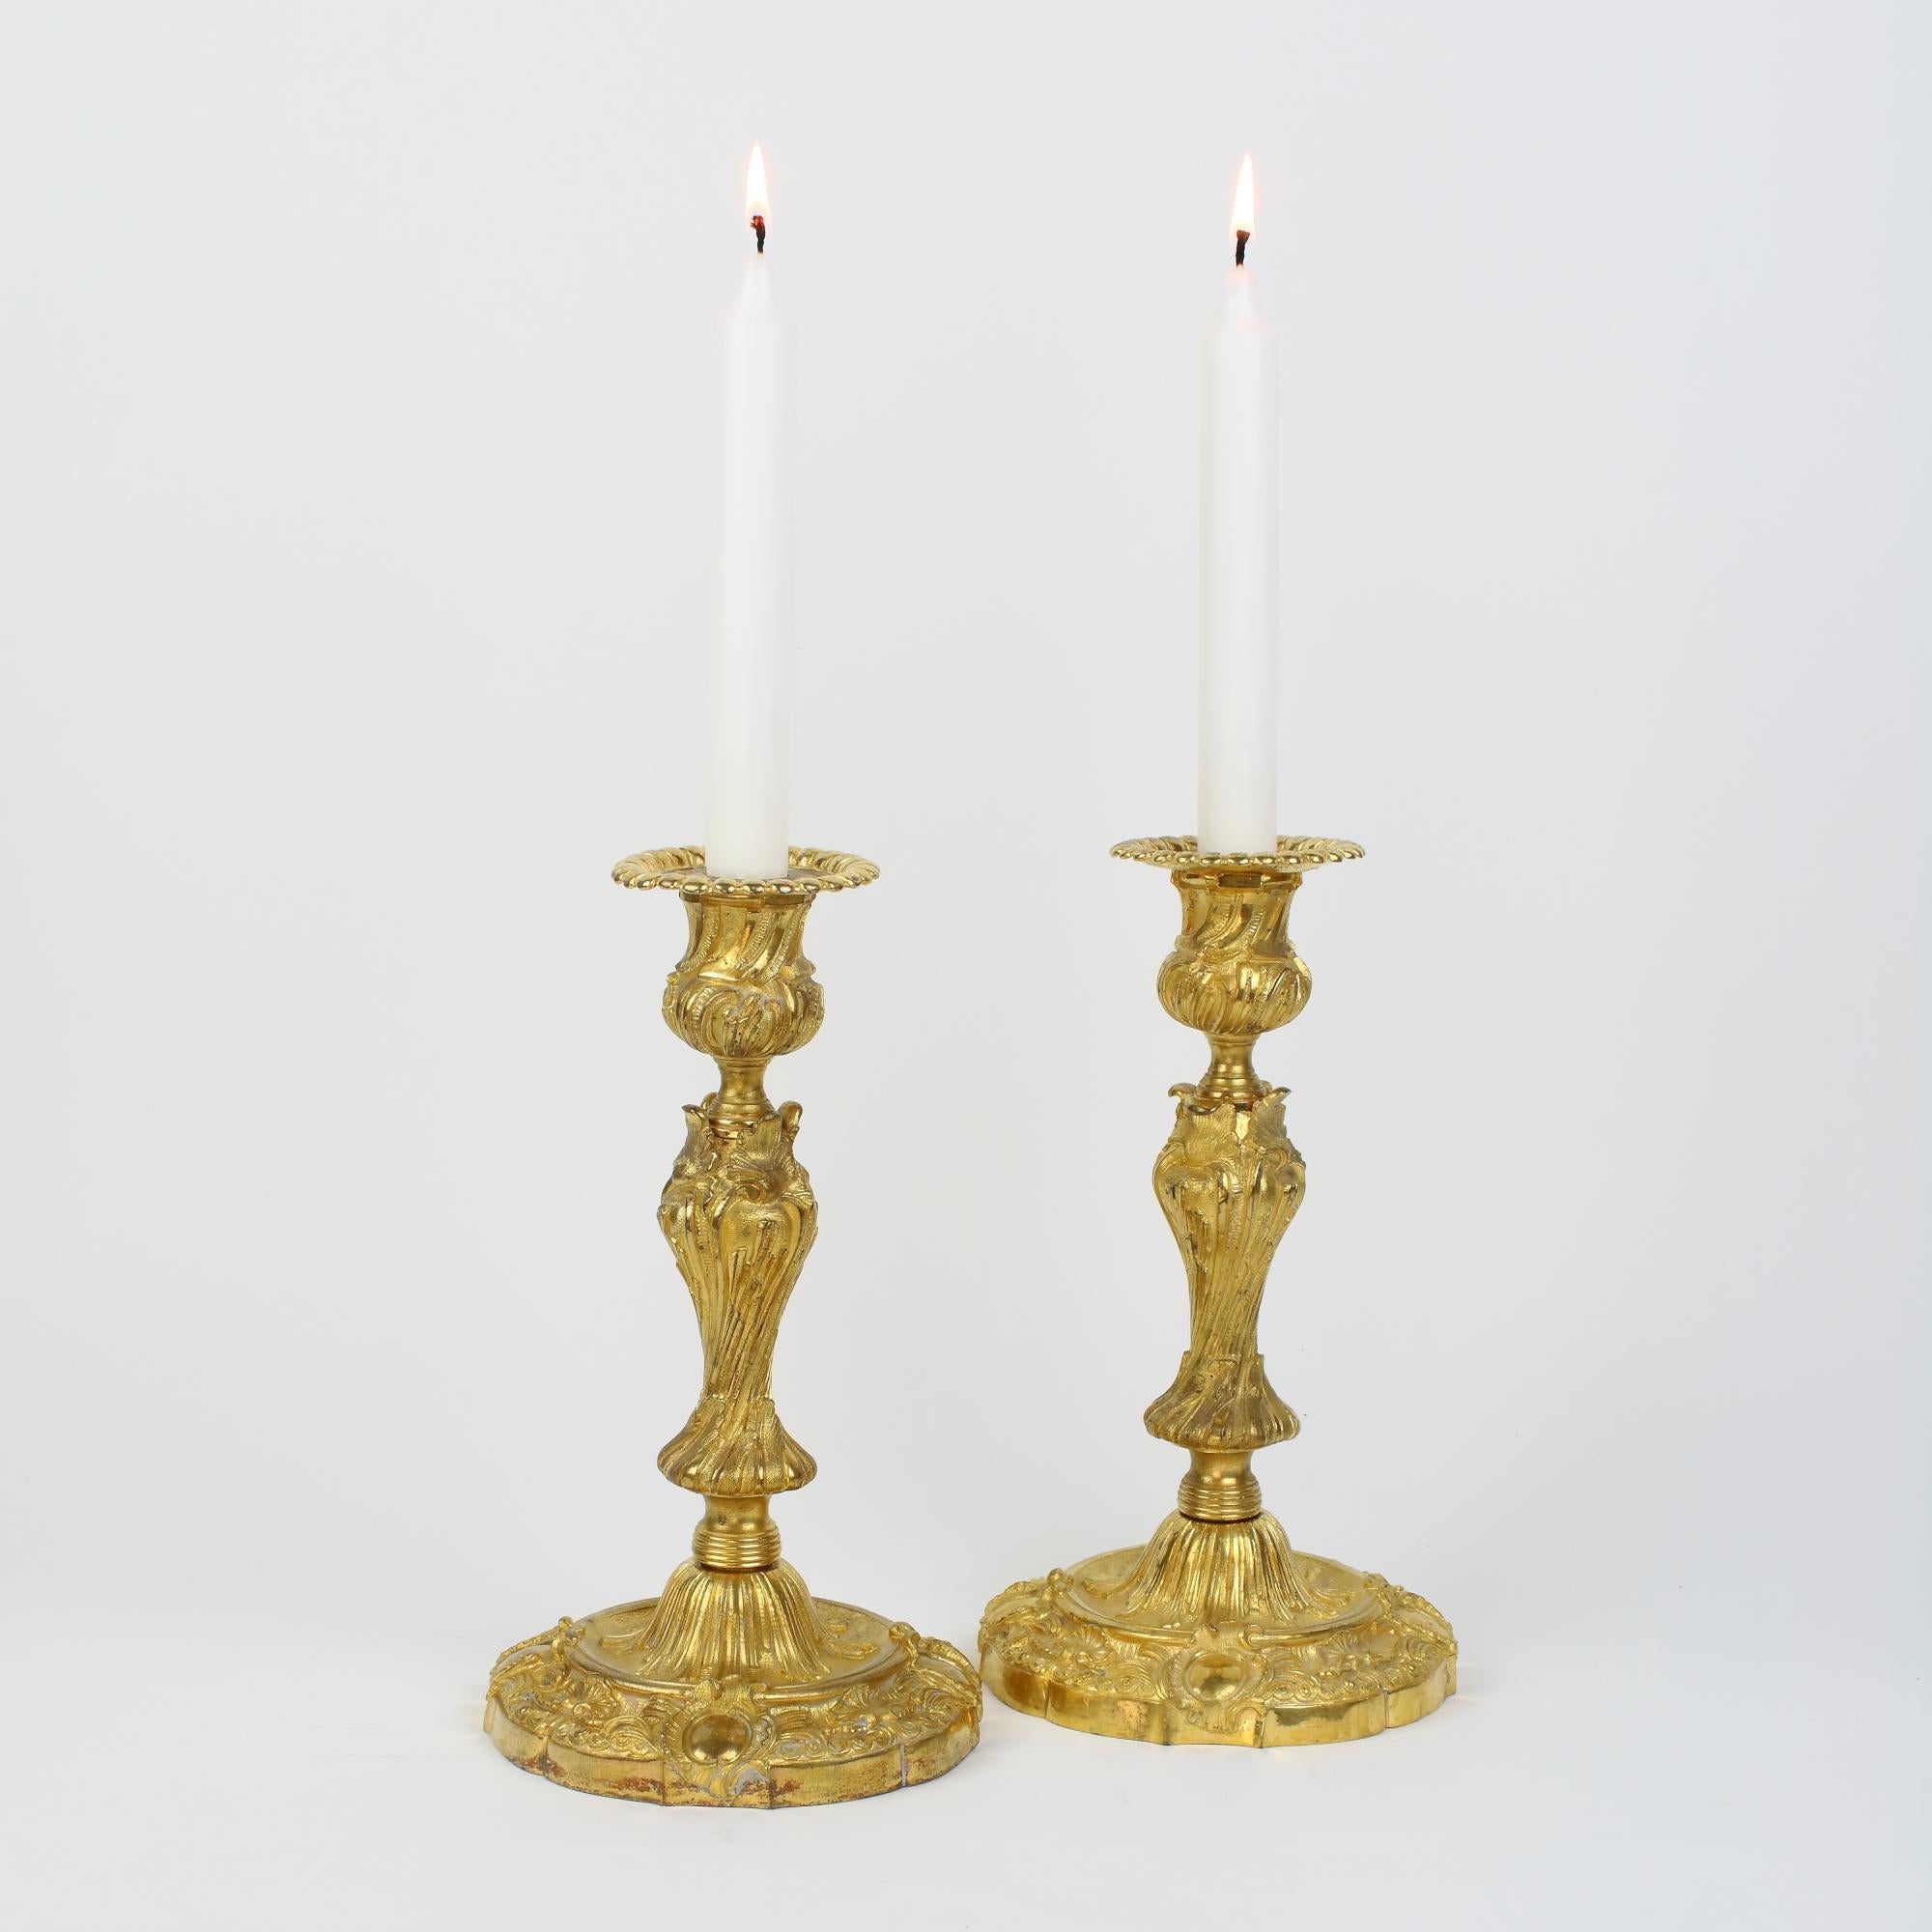 Mid 19th Century French pair of Louis XV gilt bronze candlesticks, made by Henri Picard/Paris: 

Baluster shaped stem standing on a broad round base decorated with curled cartouches, foliage and shell motifs. The stem displaying an unusual and rare